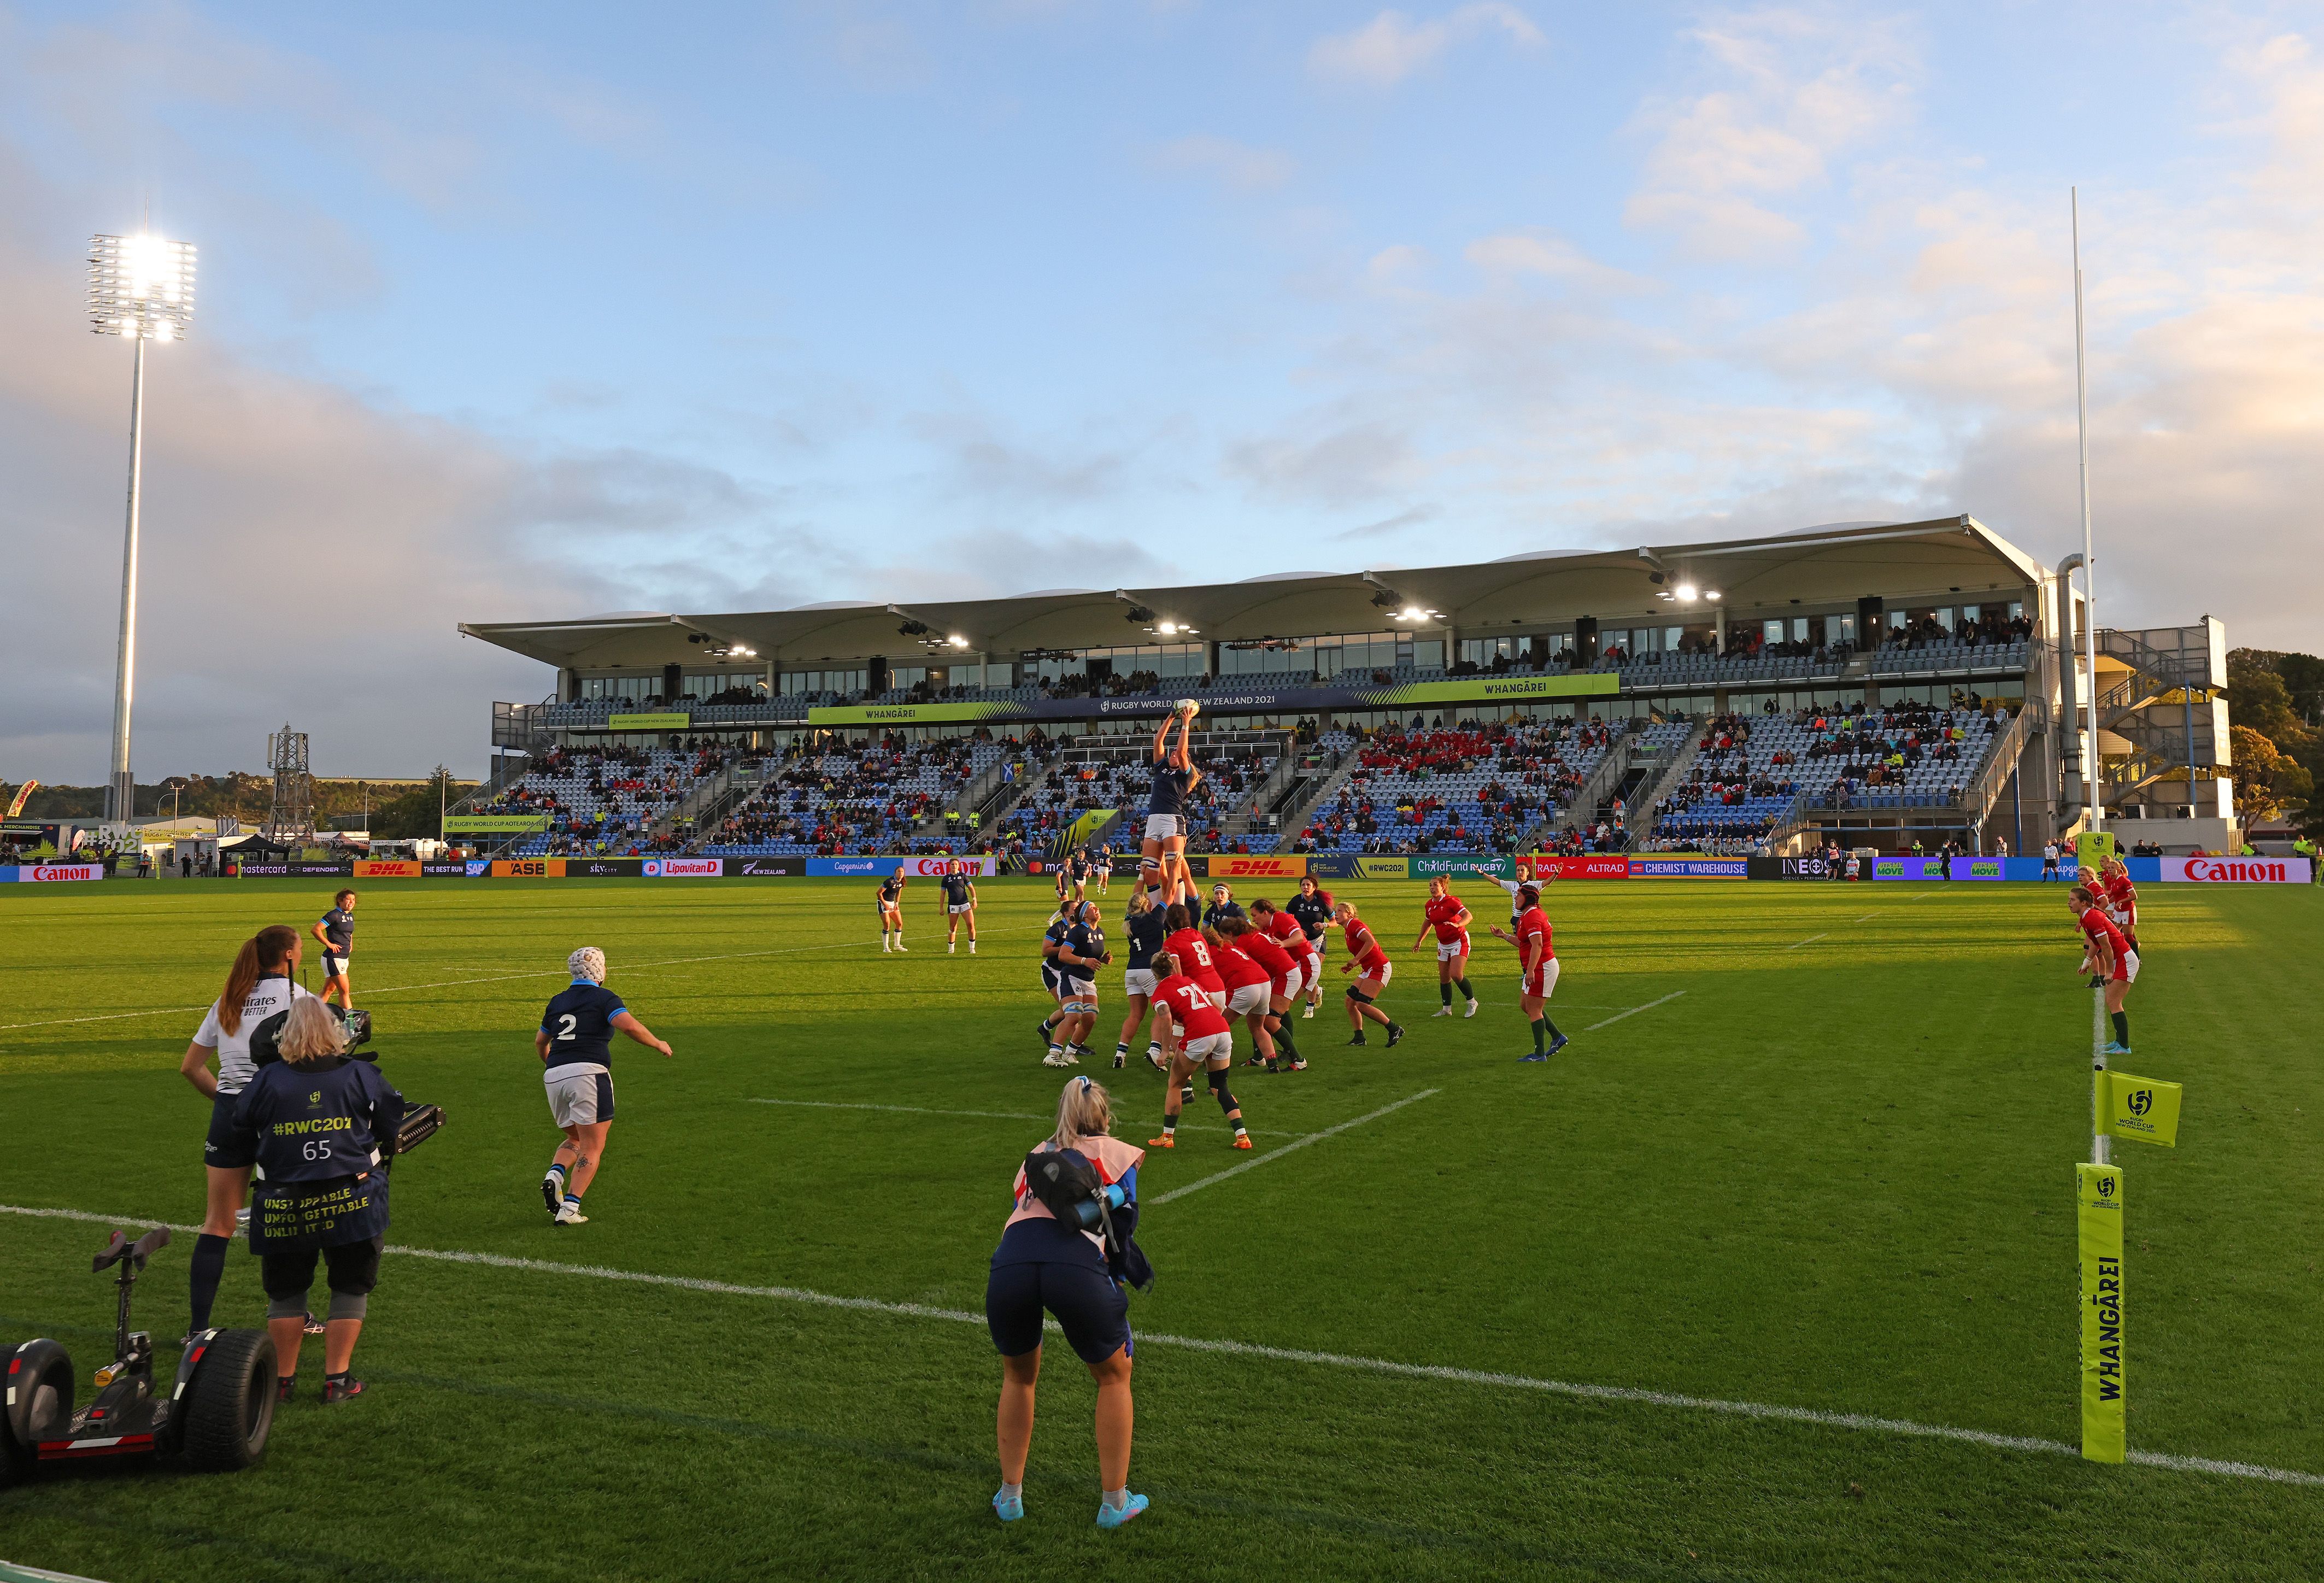 Scotland and Wales play at the Rugby World Cup in New Zealand